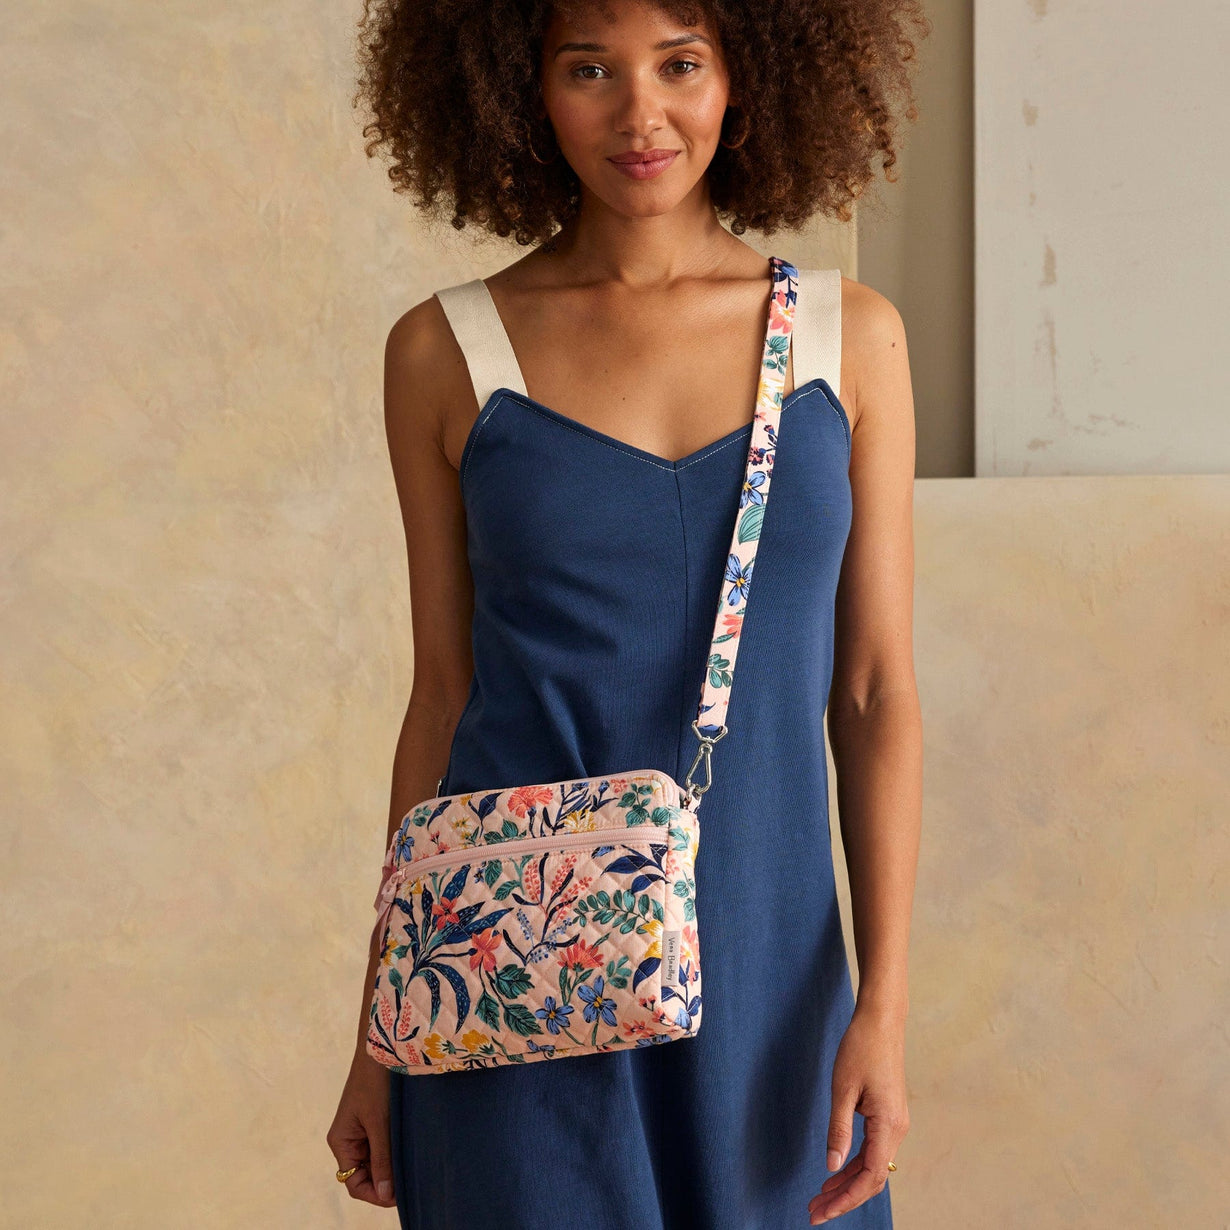 model wearing blue dress with pink crossbody bag that has a multi-color floral pattern